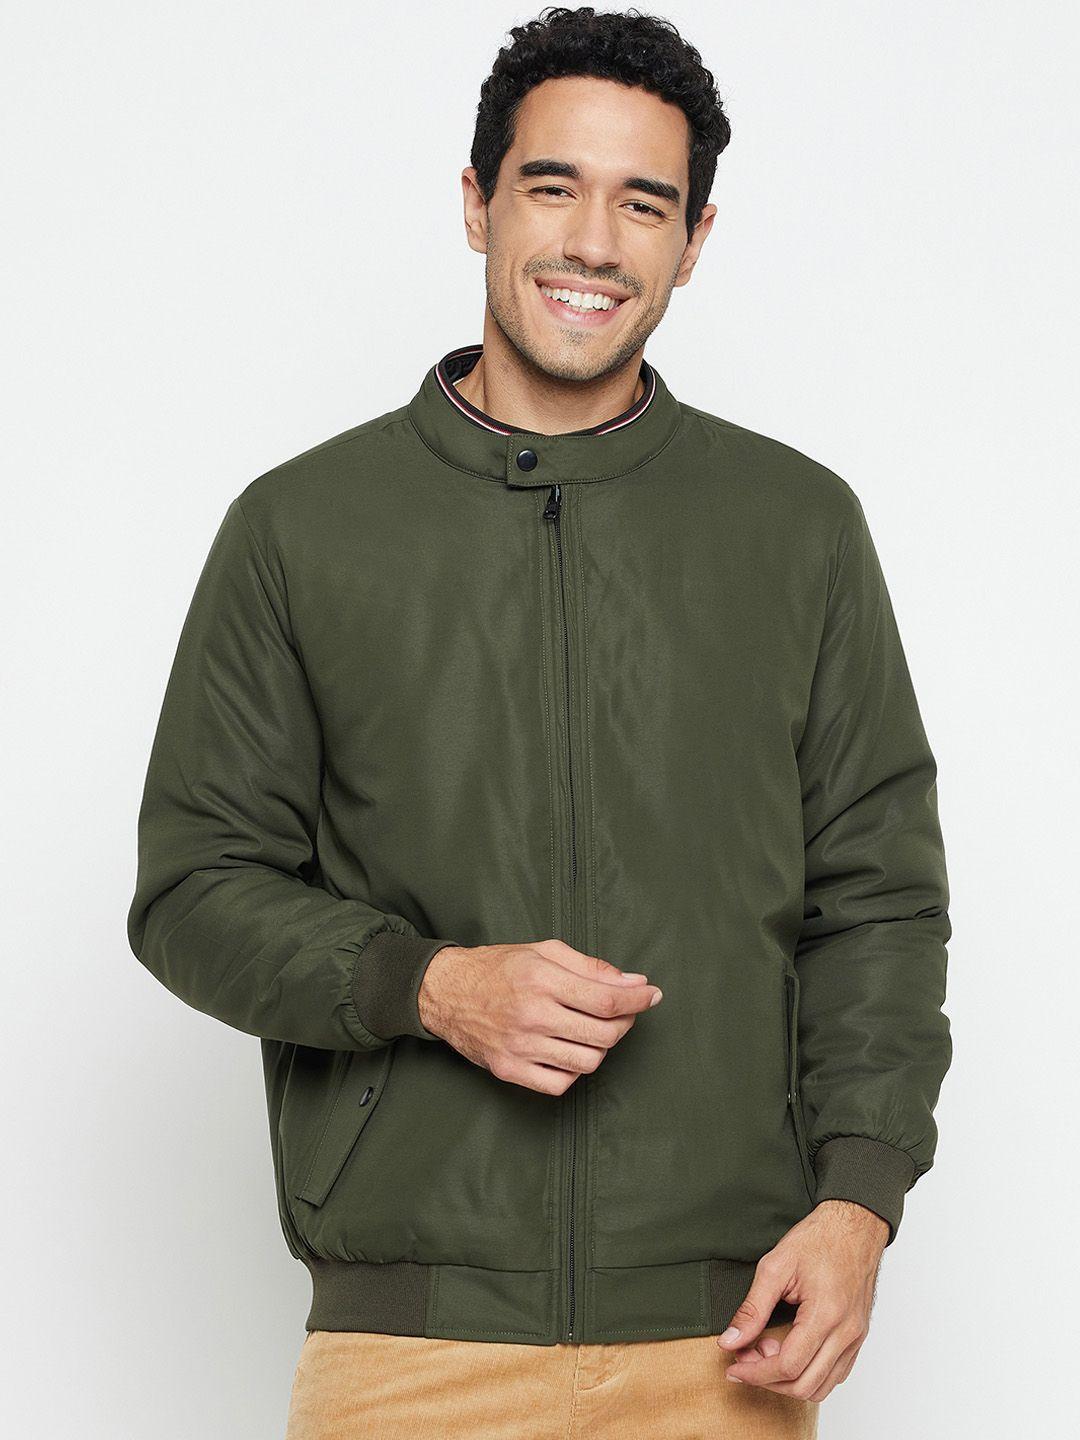 cantabil stand collar reversible bomber jacket